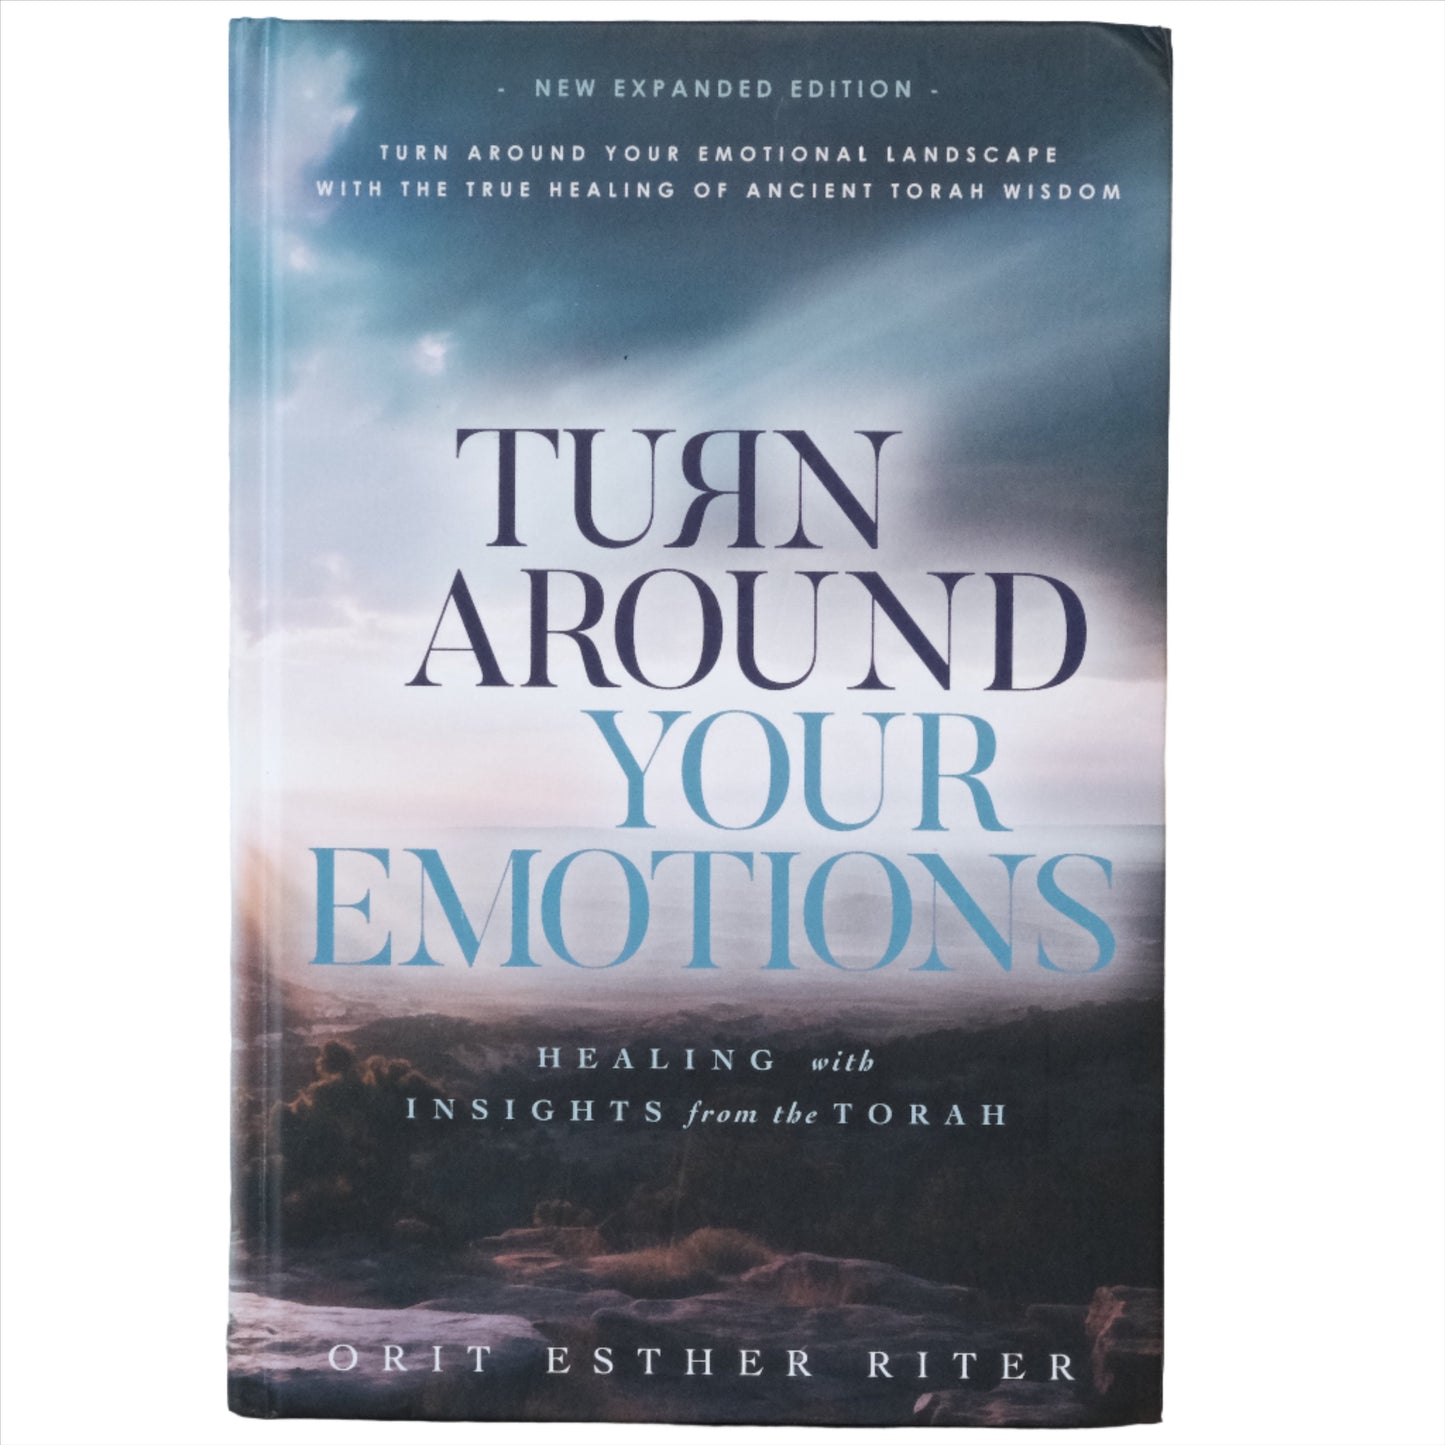 Turn Around Your Emotions Book by Orit Esther Riter